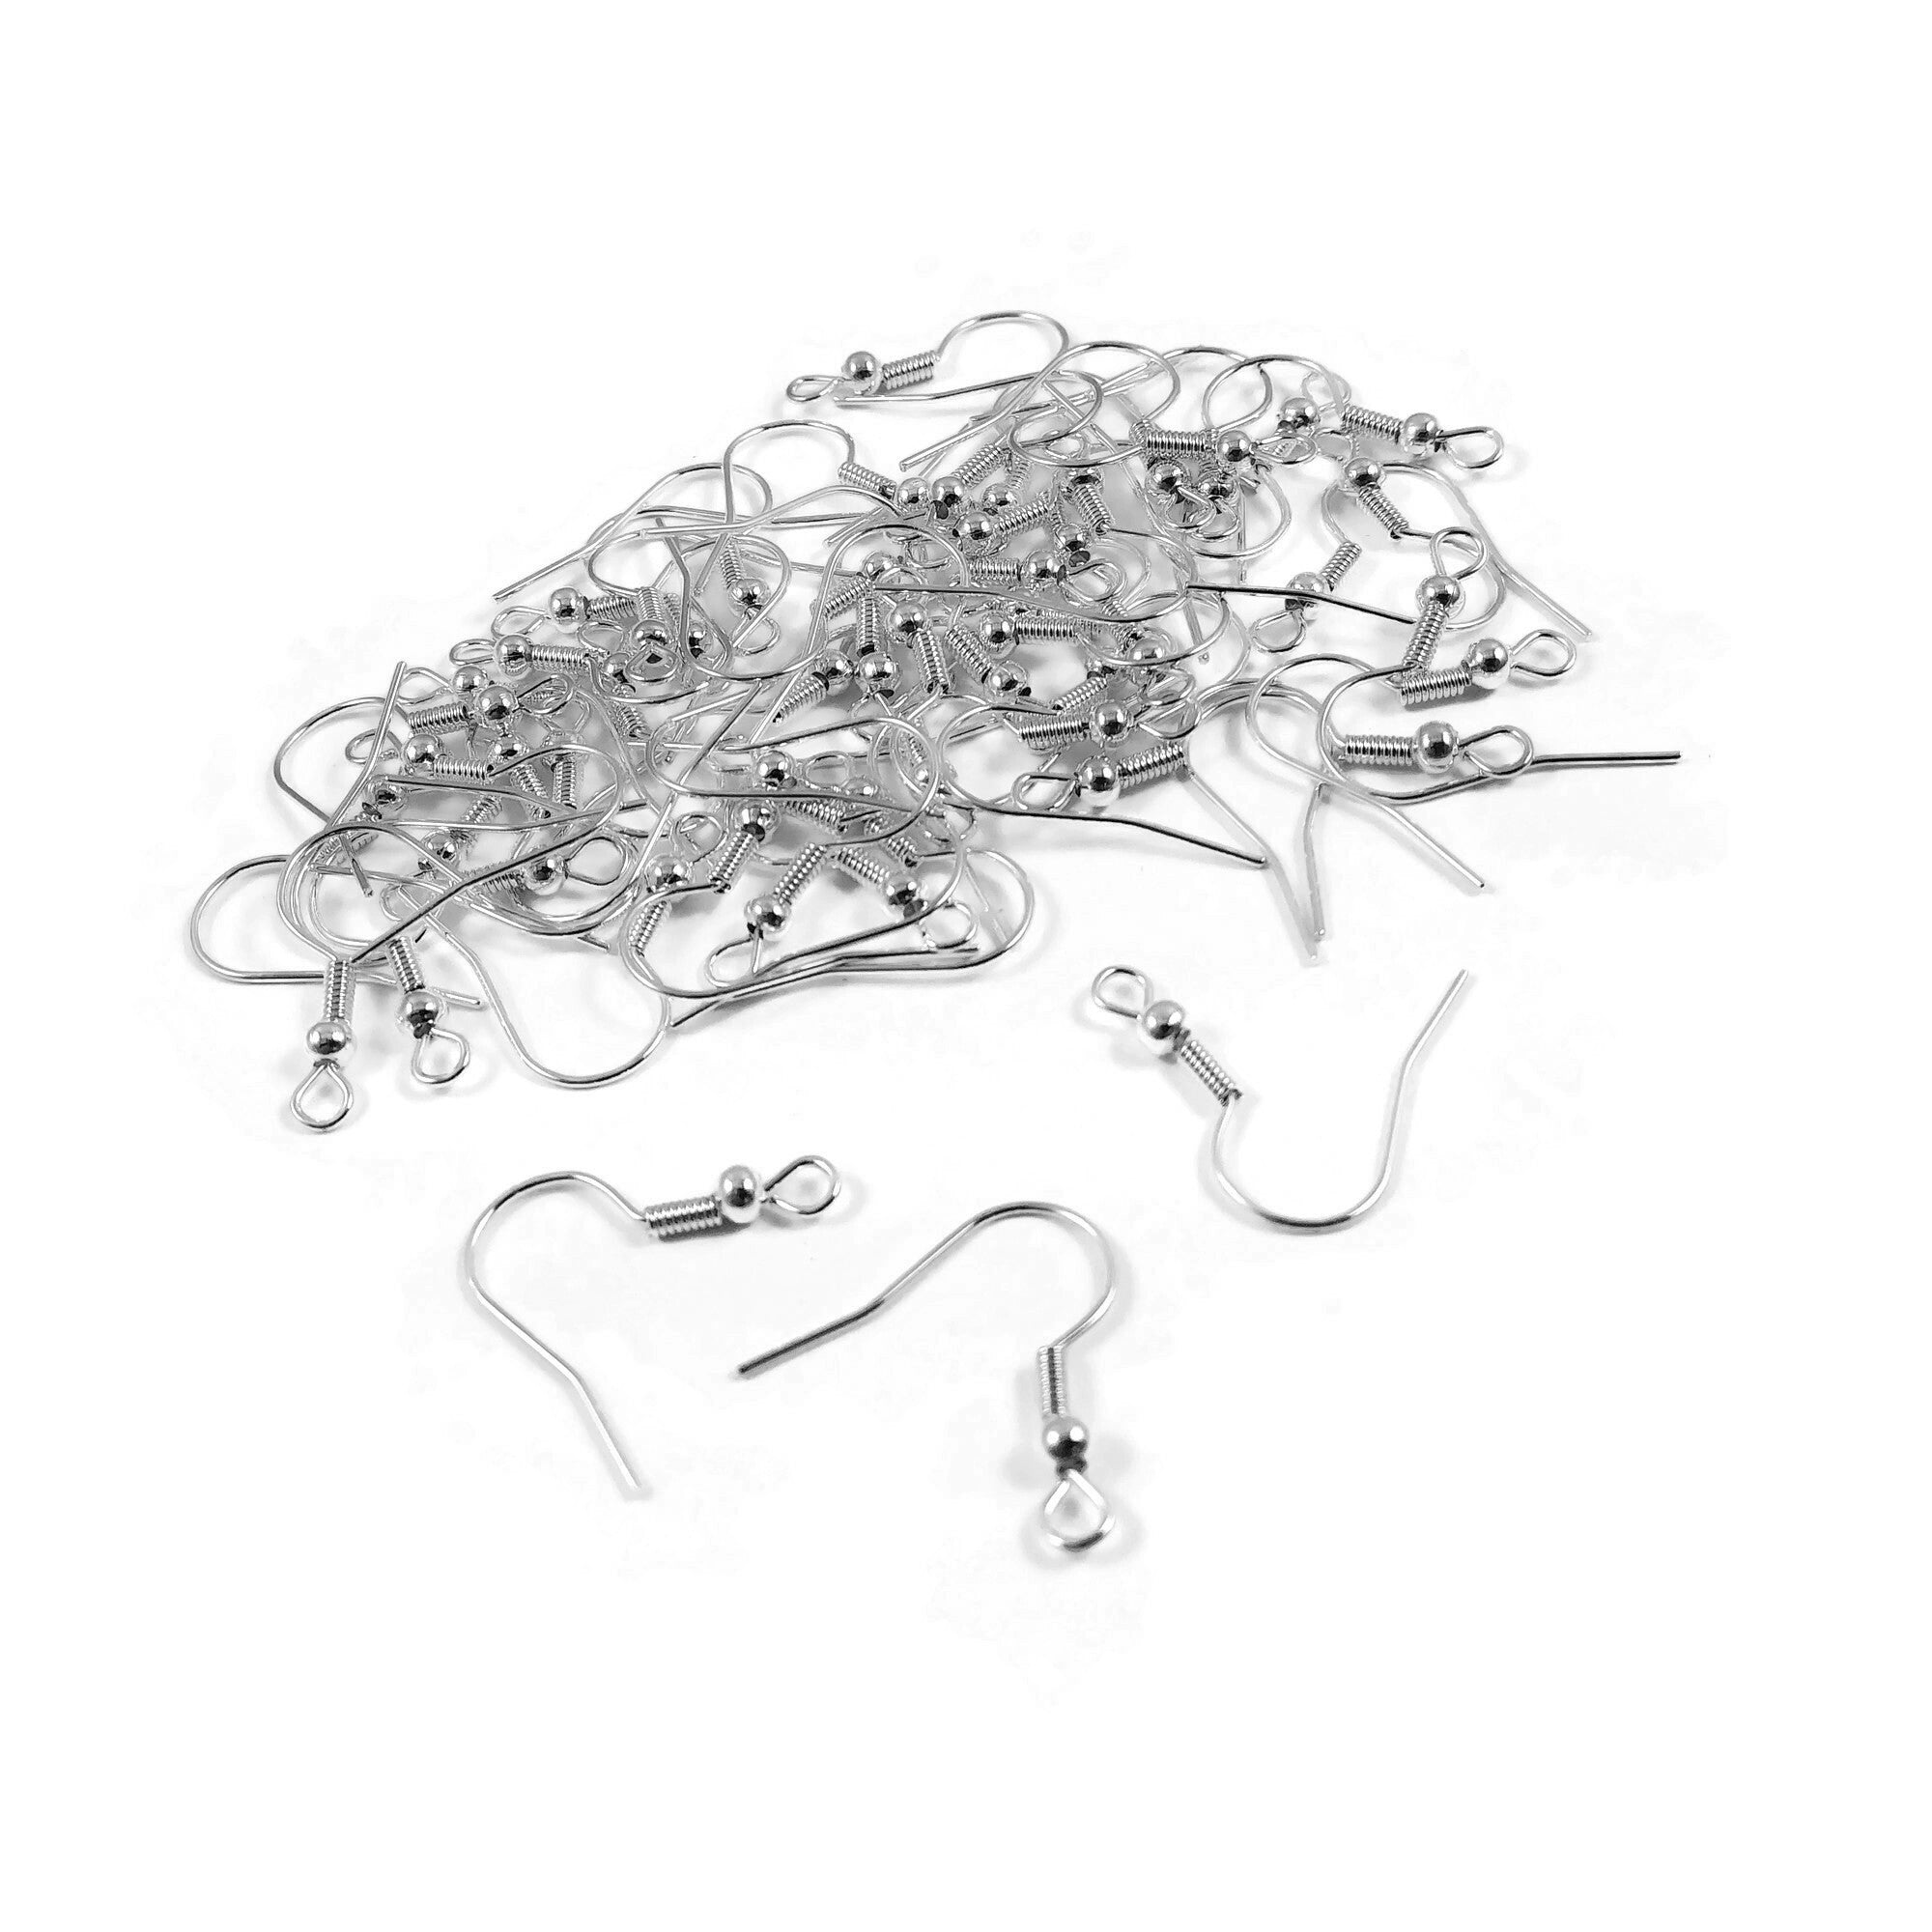 120pcs 4 Color Non-Allergenic Plastic Earring Hooks Ear Wire Hooks Earring  Findings for DIY Jewelry (White Smoke Misty Rose Black Old Lace)